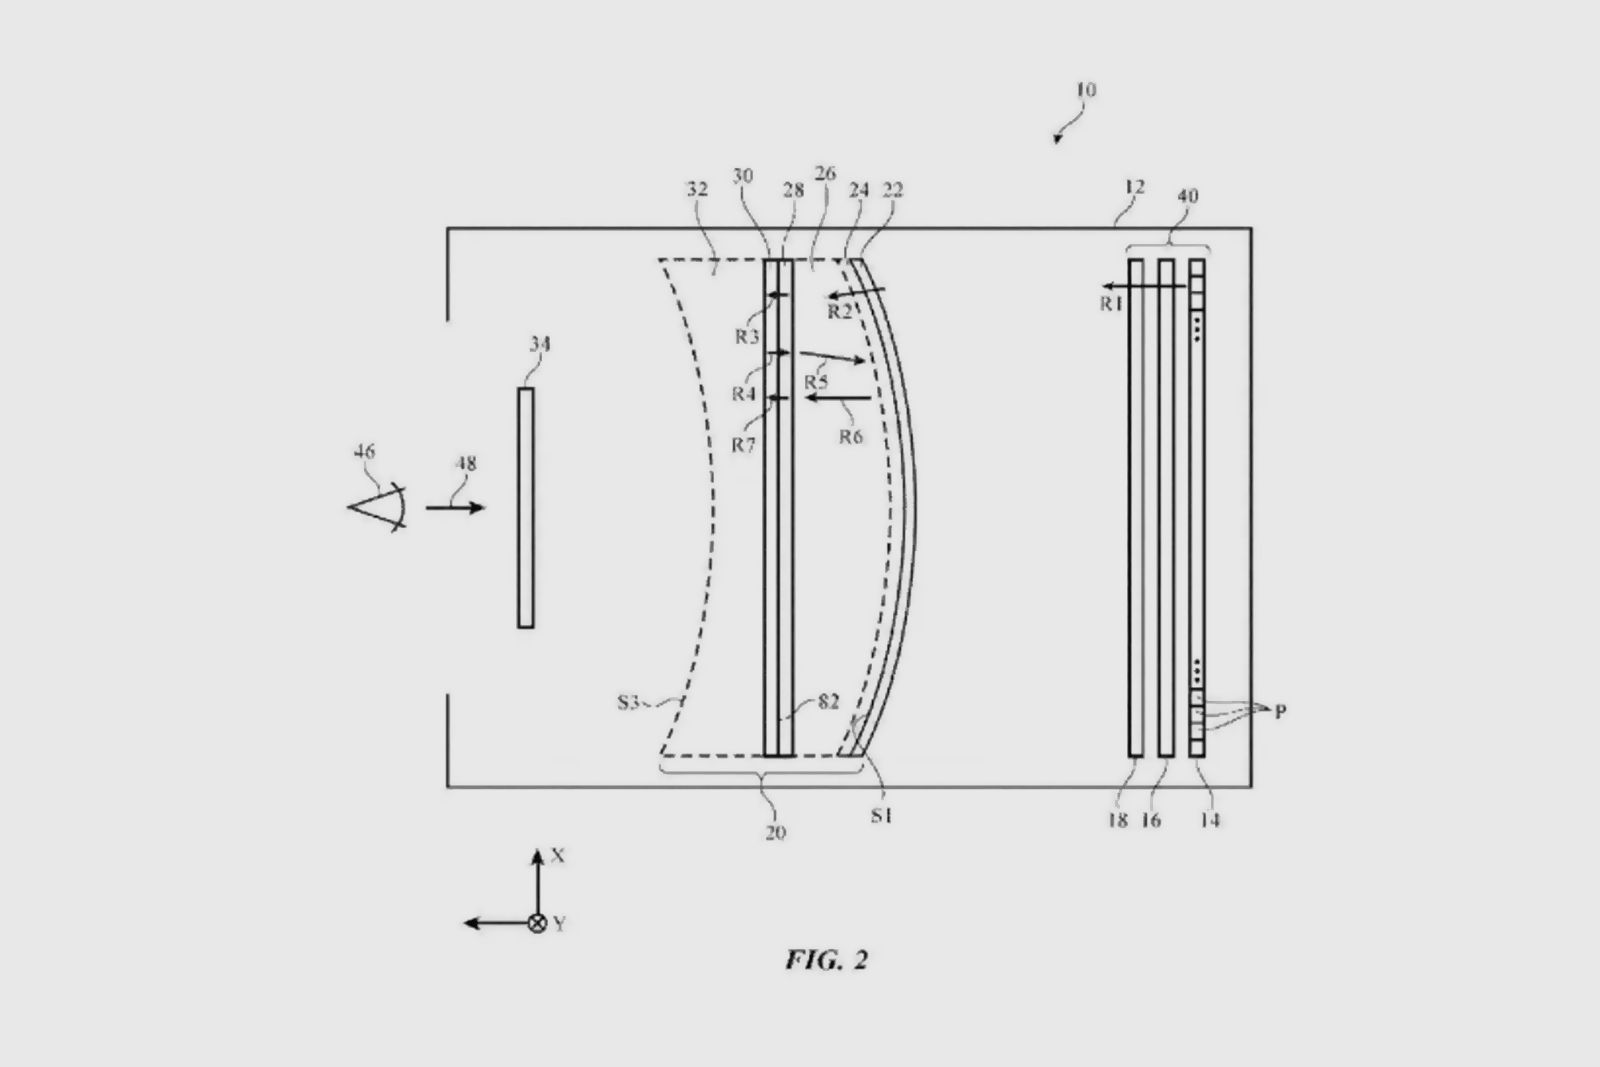 Apples ARVR headset pops up in new patent for head-mounted display image 1